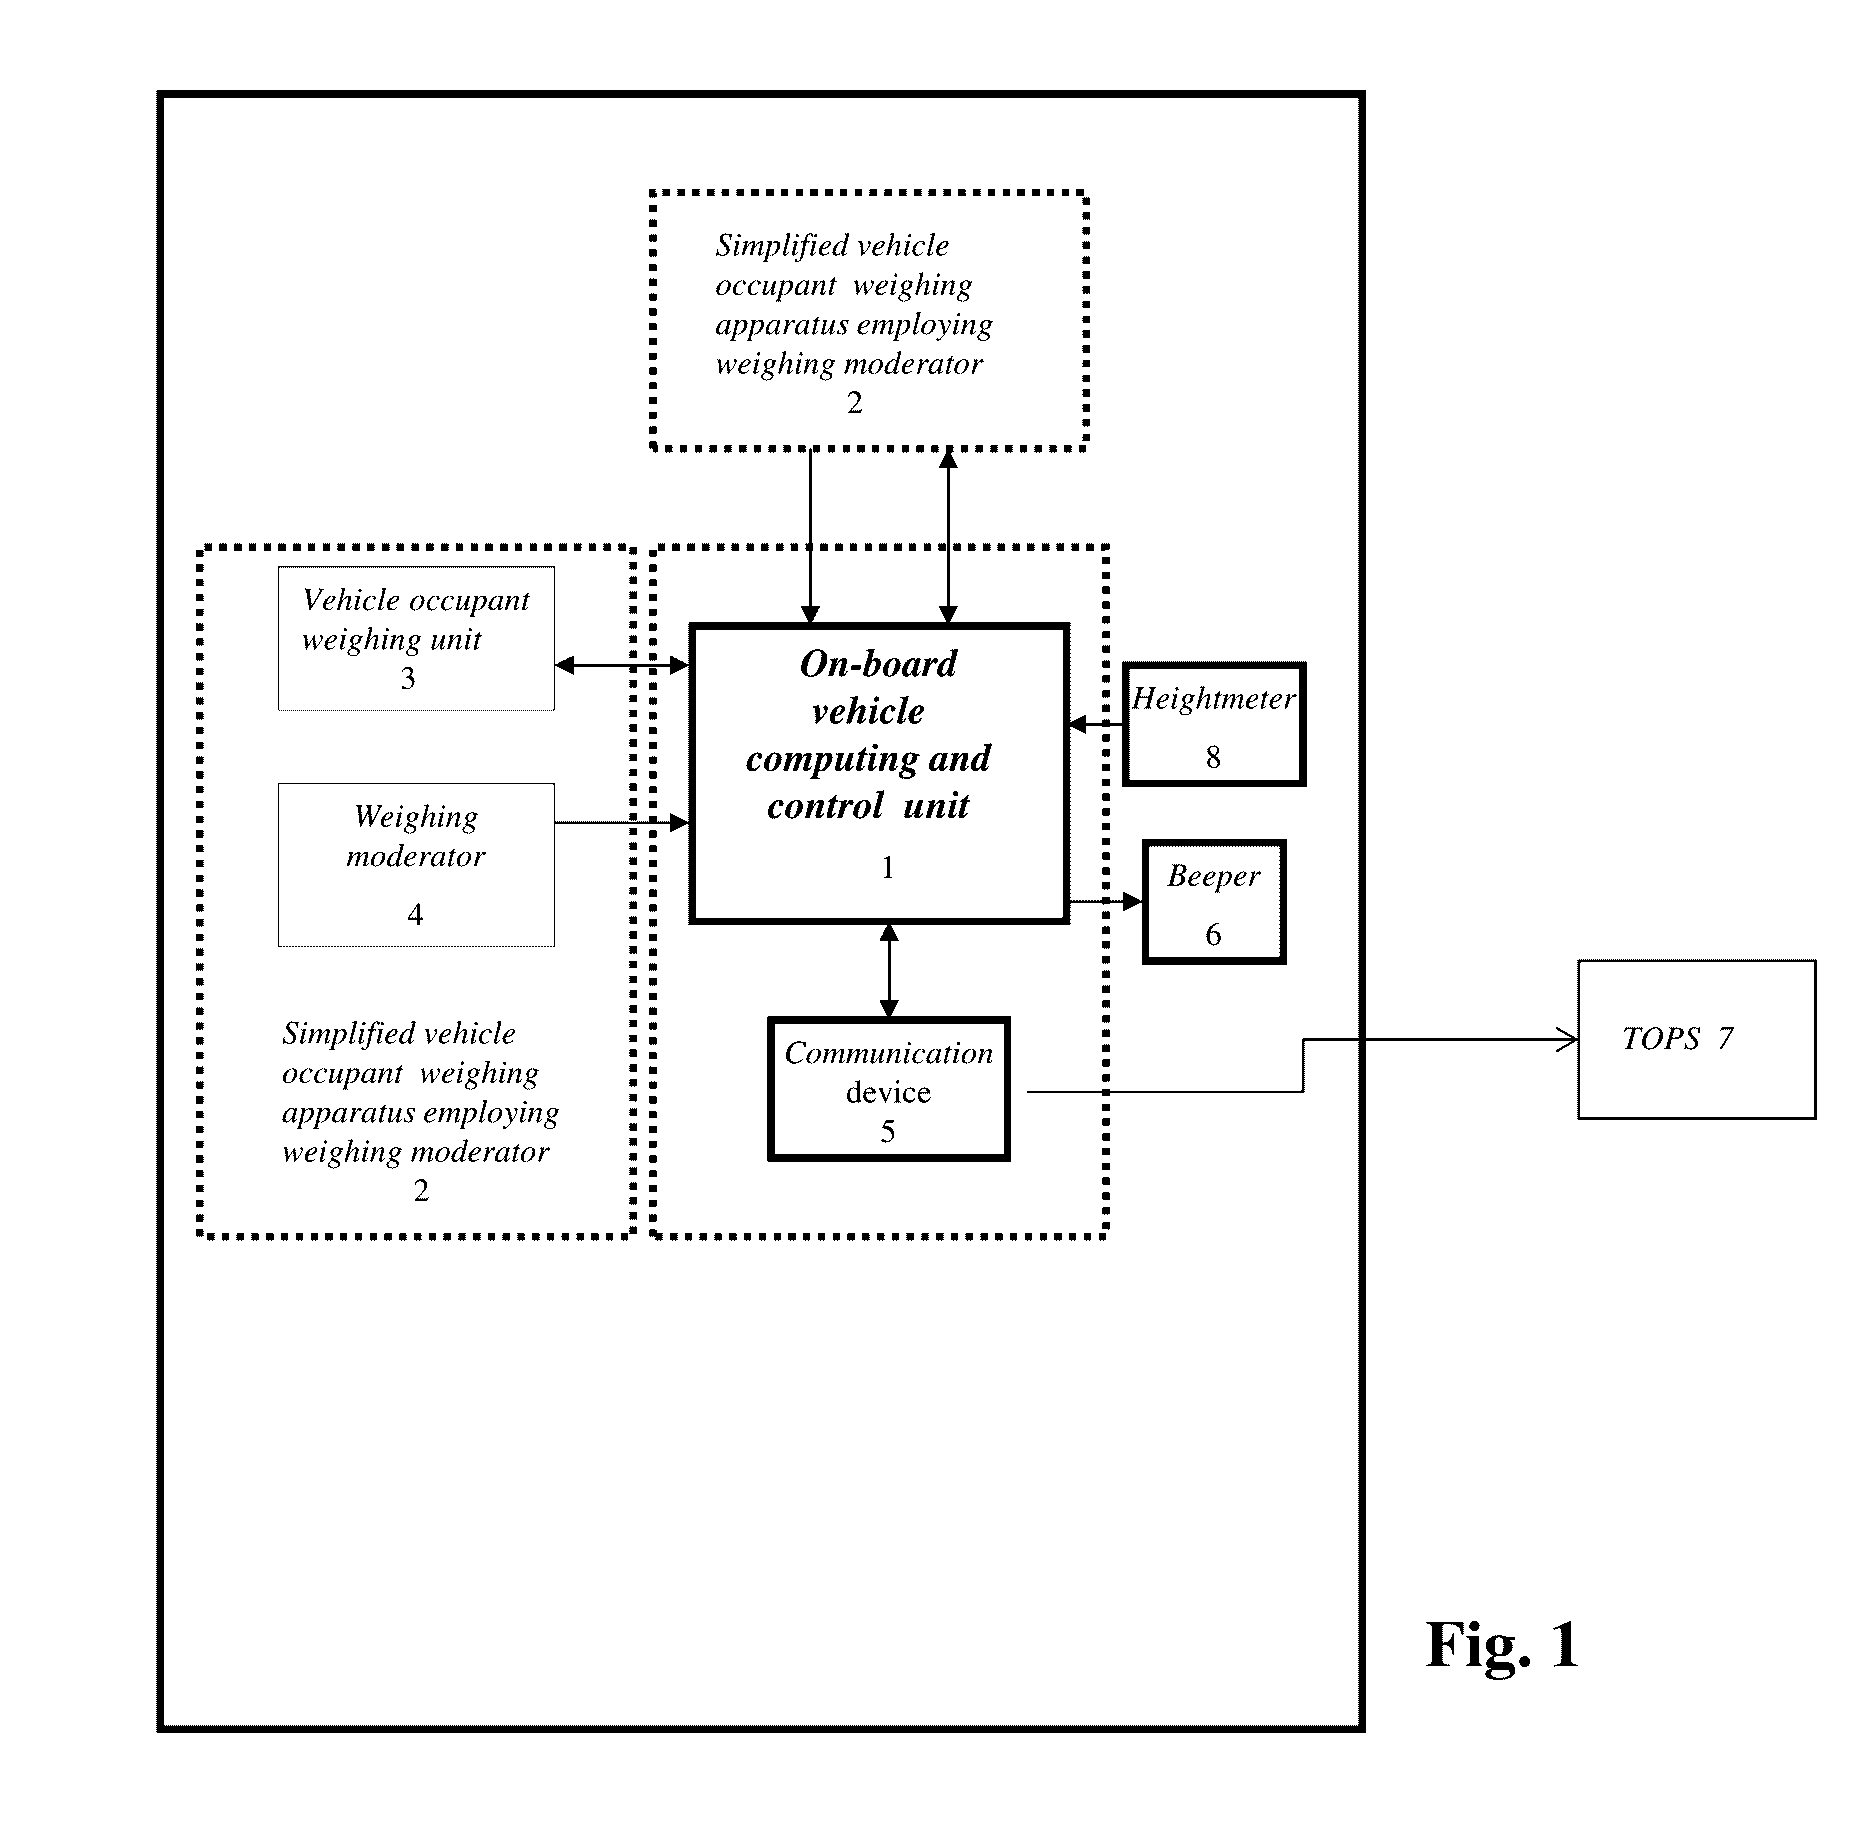 Technology and methods of on-board vehicle occupant accurate weighing by a simplified weighing apparatus based on weighing moderator and its applications in on-board occupant weighing systems